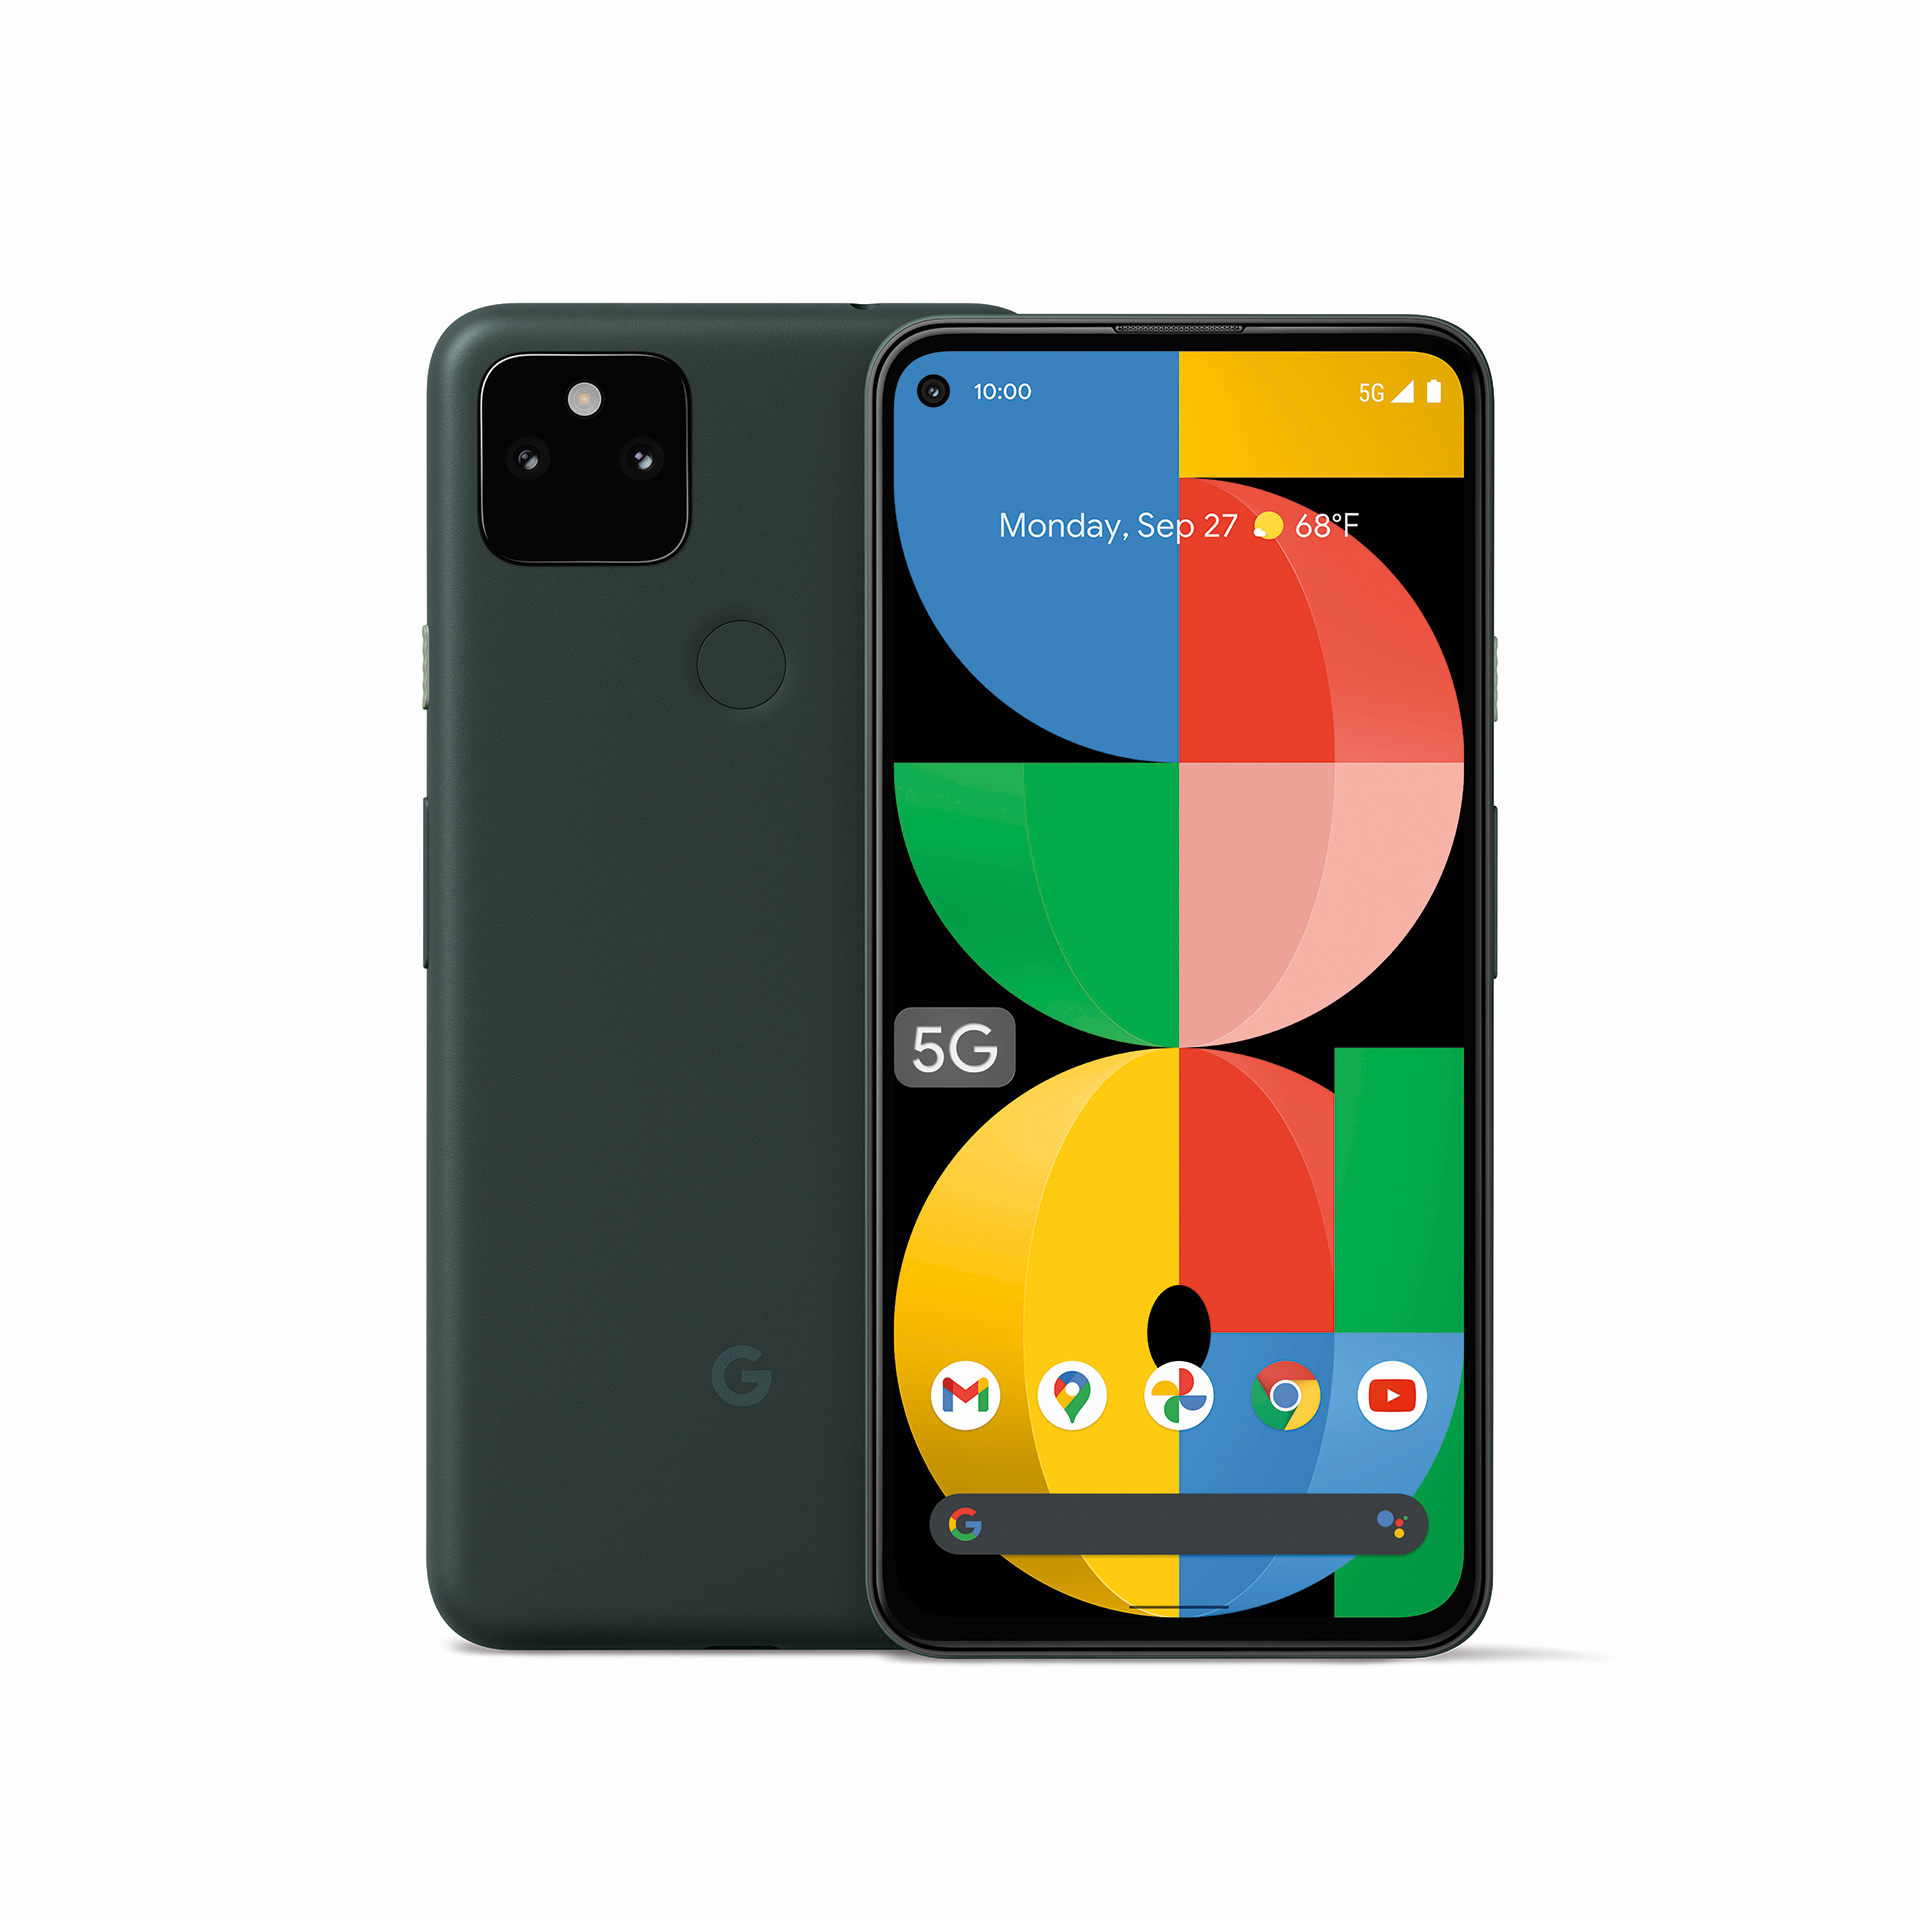 Google Pixel 5a news pictures are mostly black